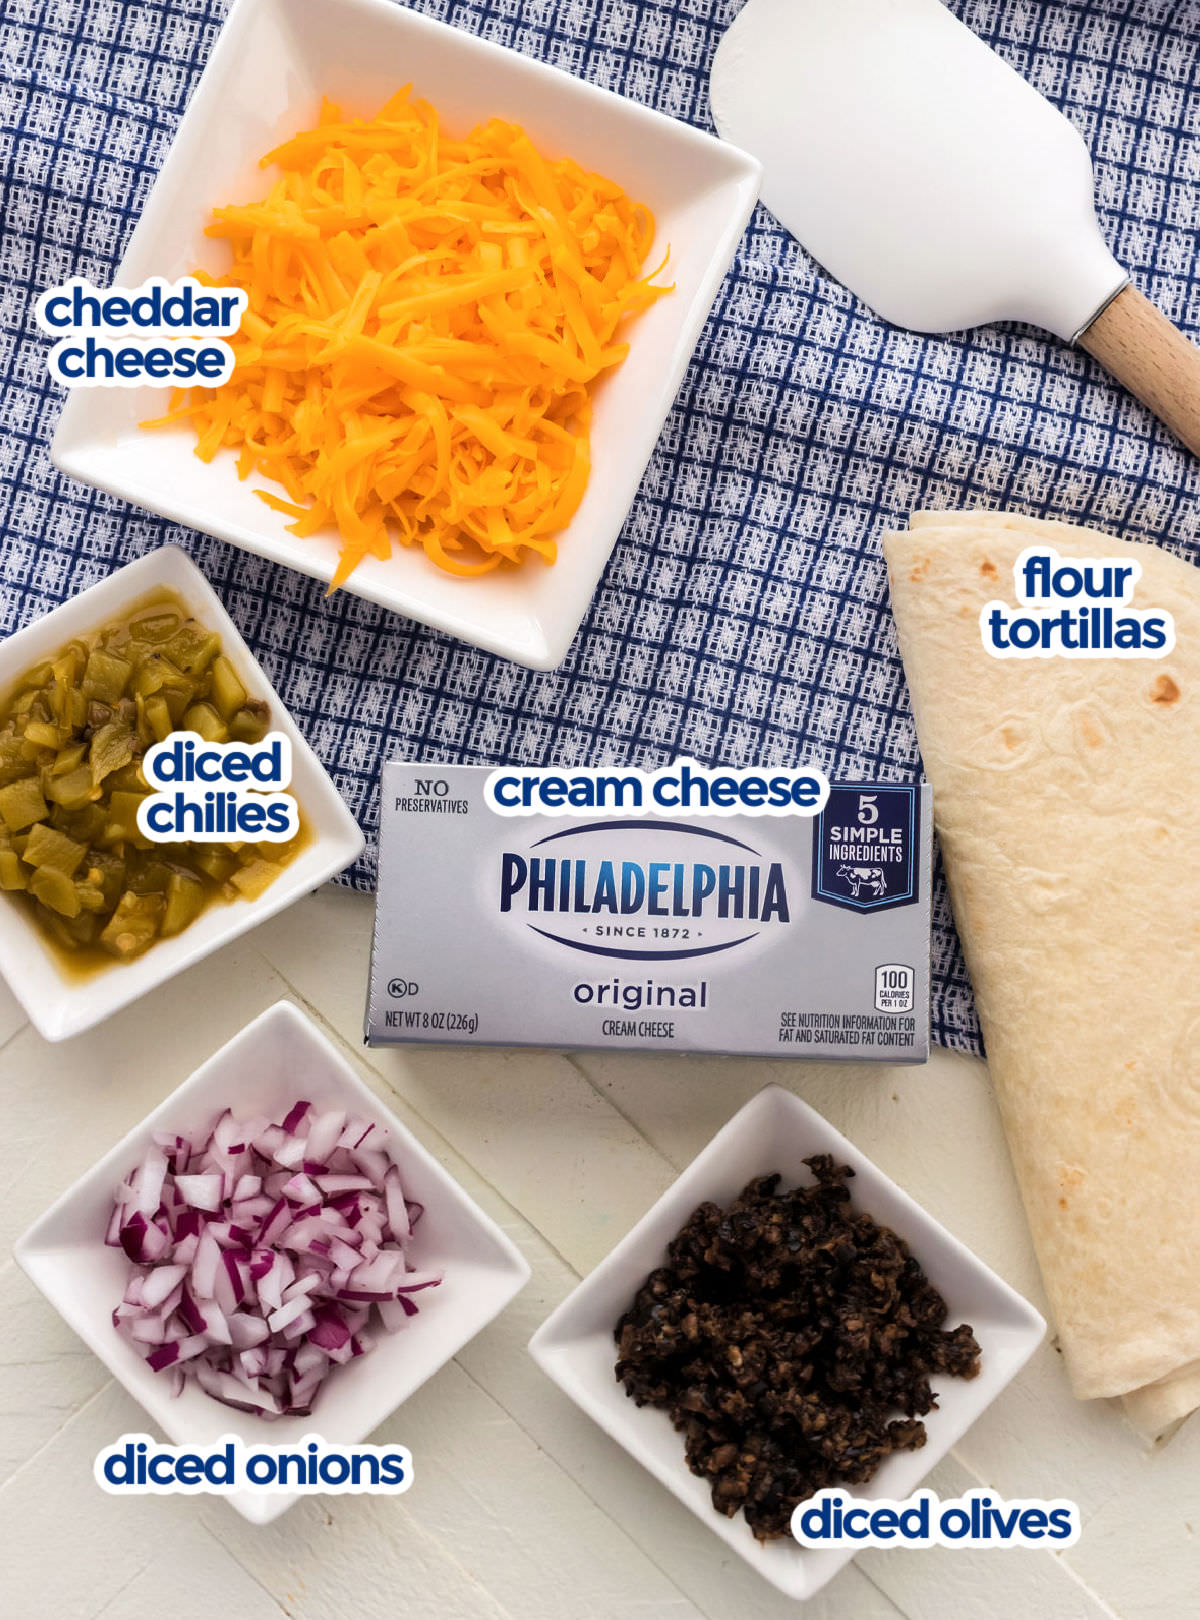 All the ingredients you will need to make Tortilla Pinwheels including cheese, cream cheese, flour tortillas, diced chilies, red onion and olives.